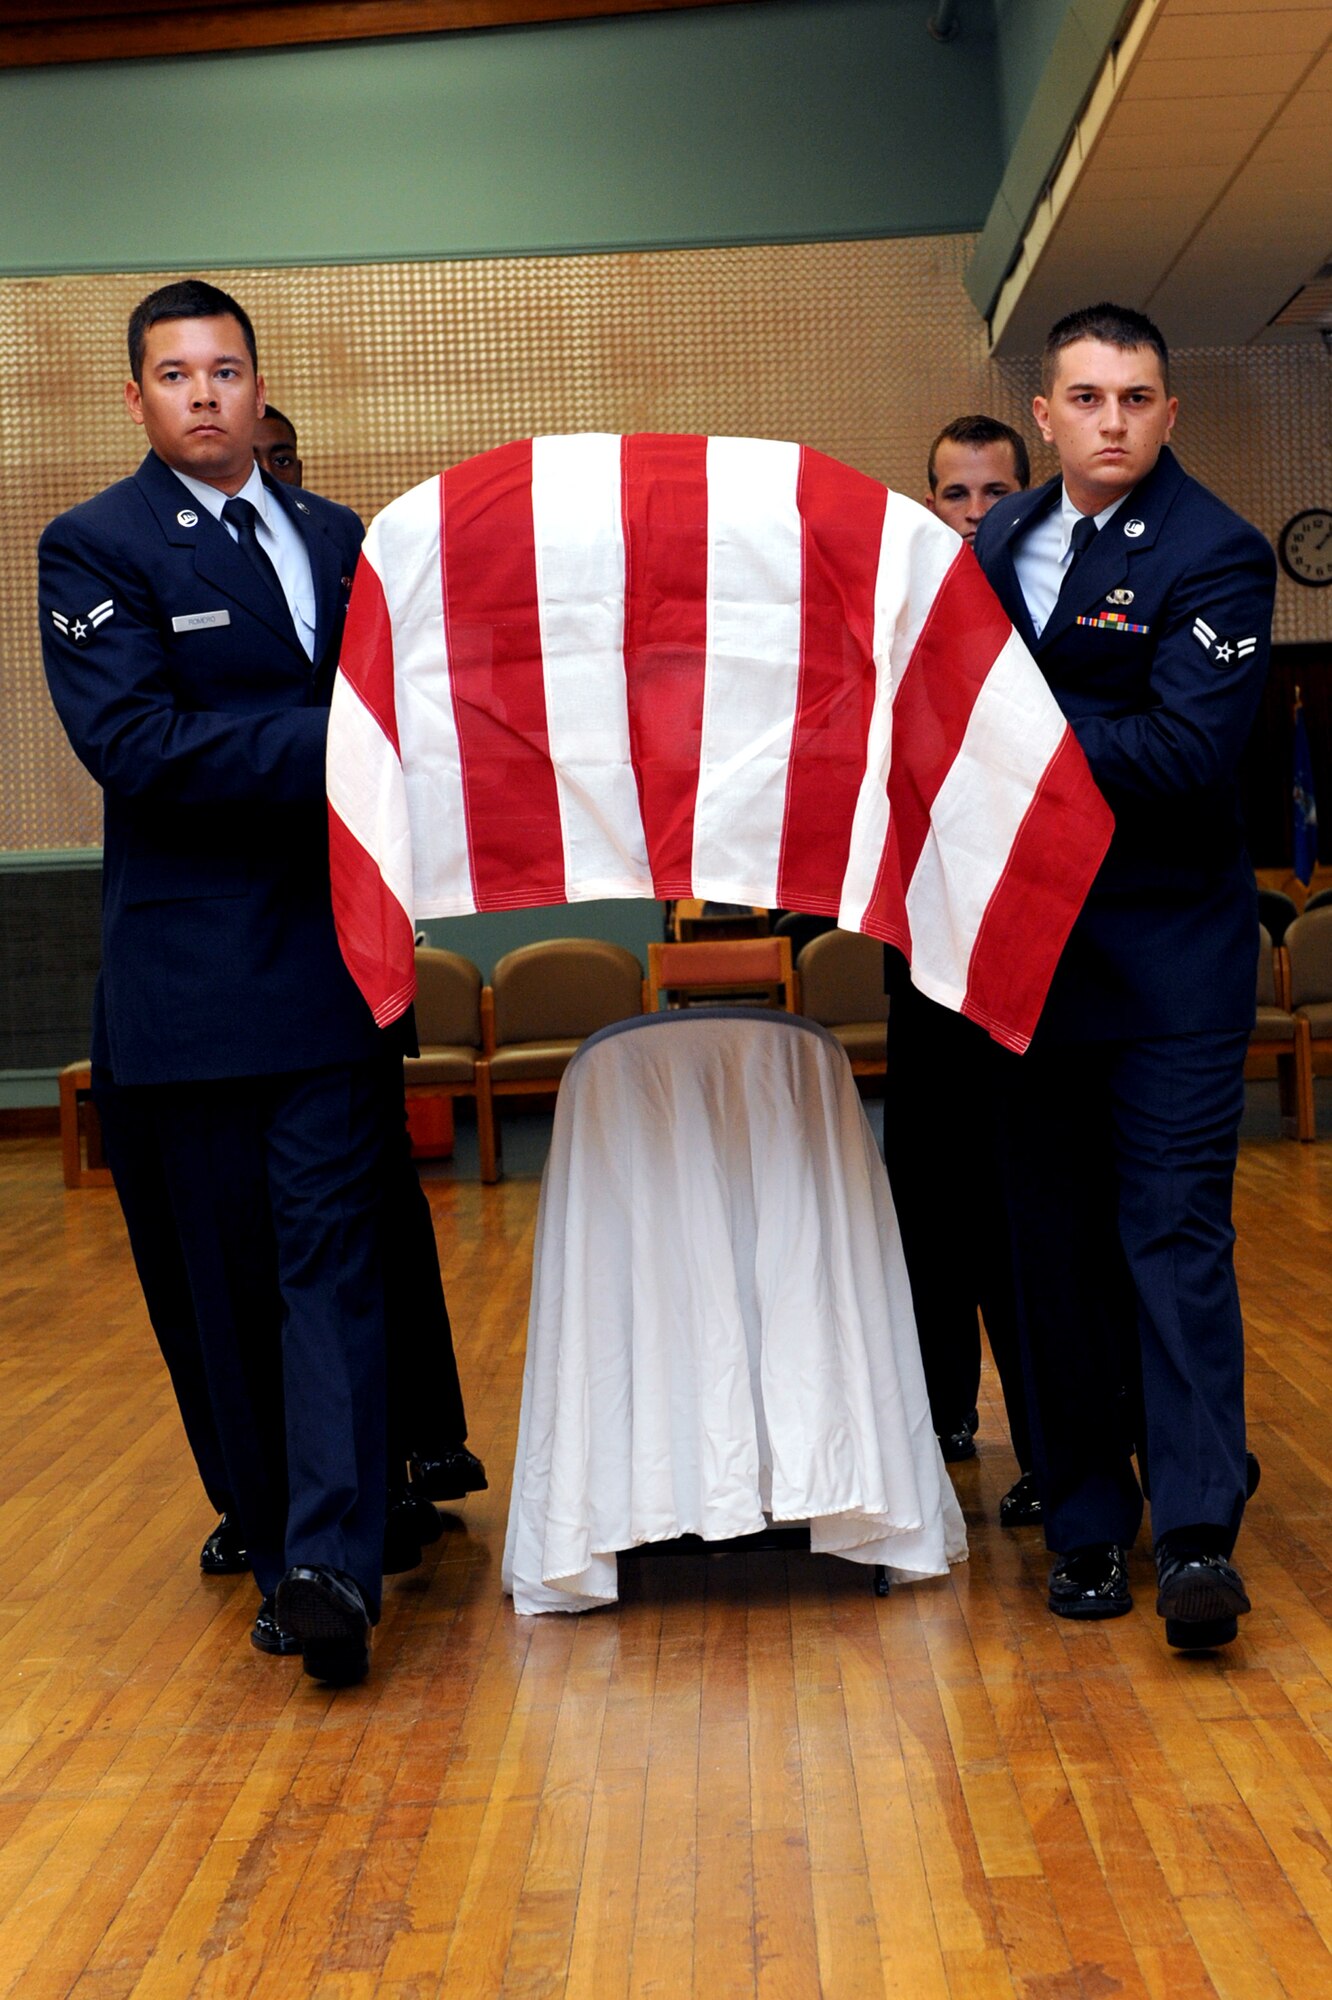 The newest members of the Little Rock Air Force Base’s Honor Guard lift a casket over a chair June 14 during a mock funeral ceremony at the Honor Guard graduation at the Thomas Community Activities Center. The chair was used to represent a headstone they would have to maneuver around in a real funeral ceremony. (U.S. Air Force photo by Senior Airman Ethan Morgan)